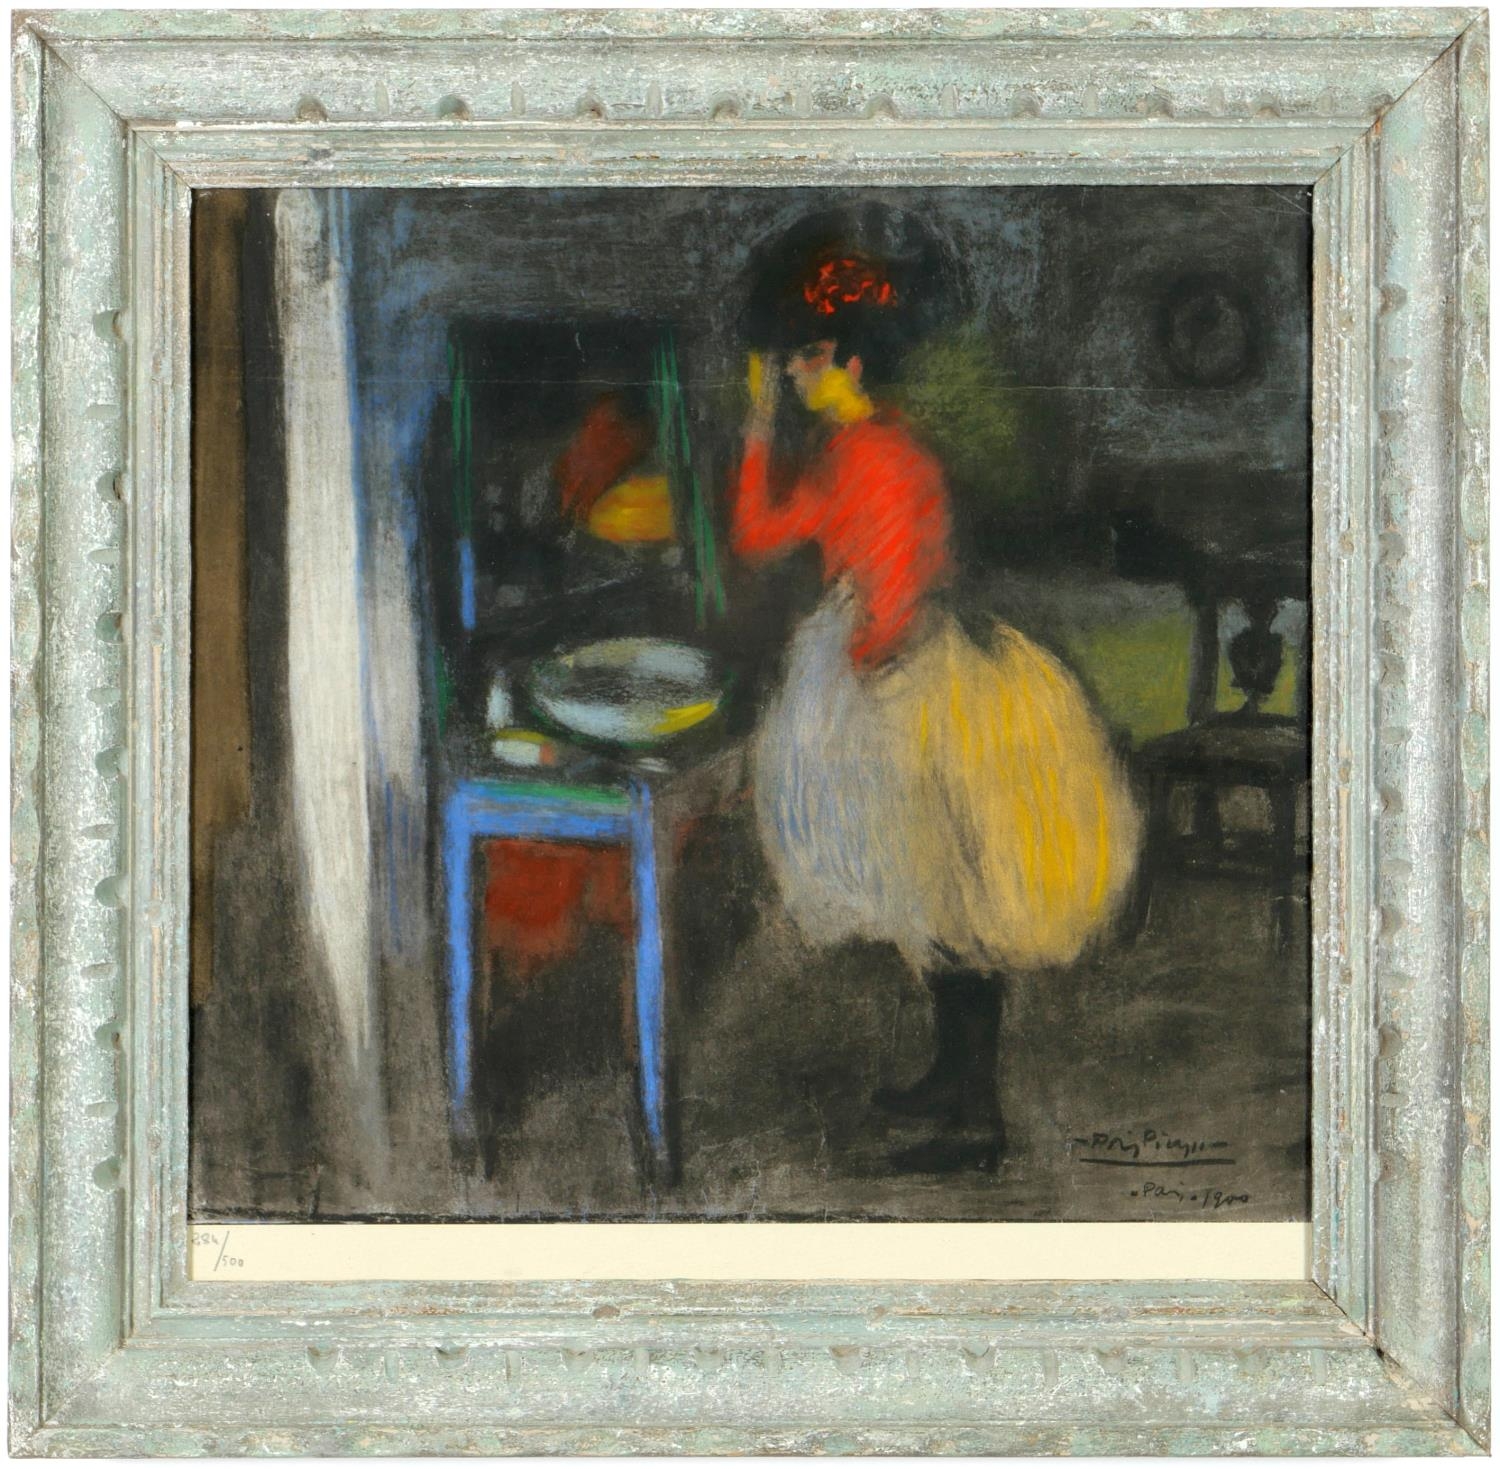 PABLO PICASSO, Devant le Miroir, pochoir – signed in the plate, rare pencil numbered edition 500,